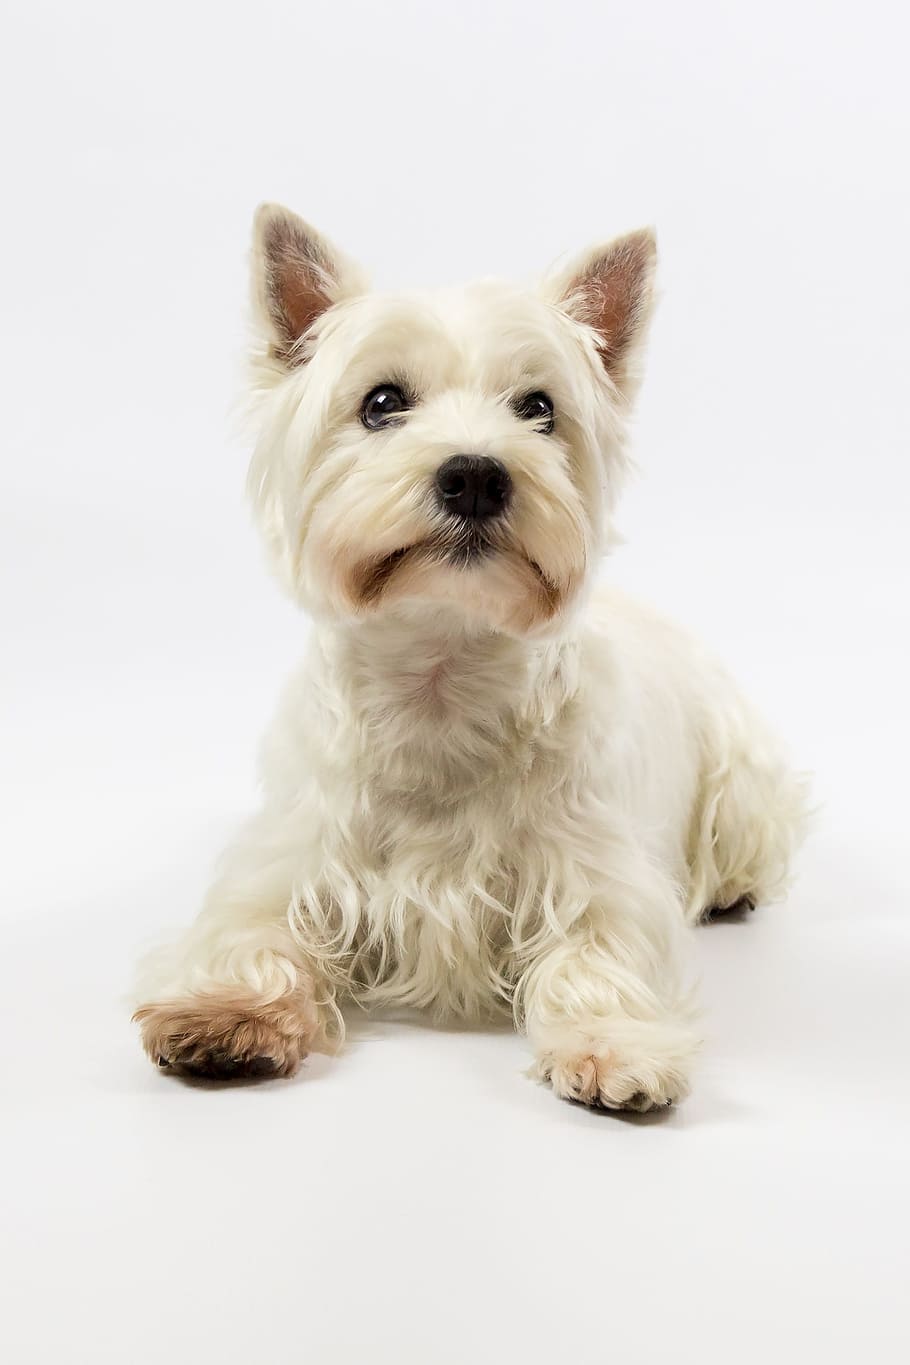 West Highland Terrier, Westie, terrier, dog, white, pet, pedigree, small, cute, purebred